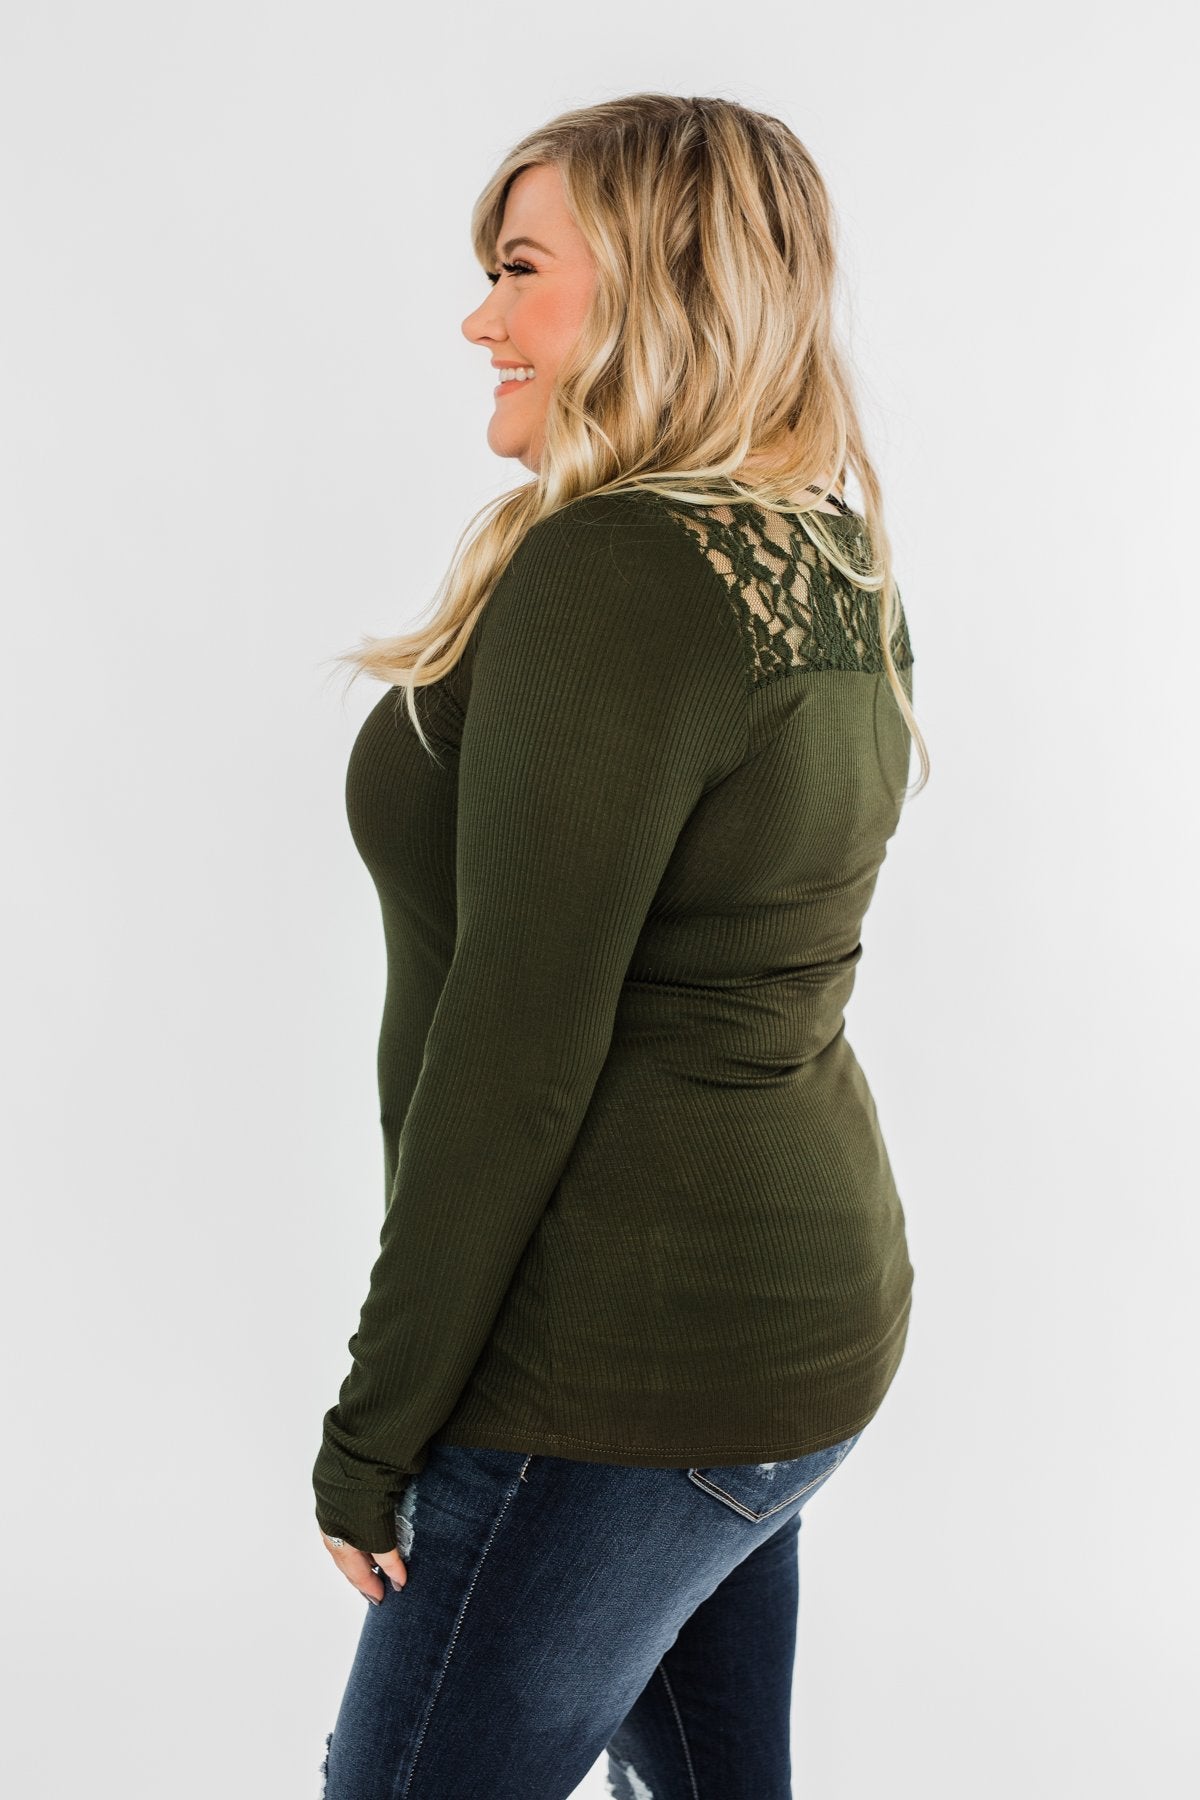 Lace Back 5-Button Henley Top- Olive – The Pulse Boutique